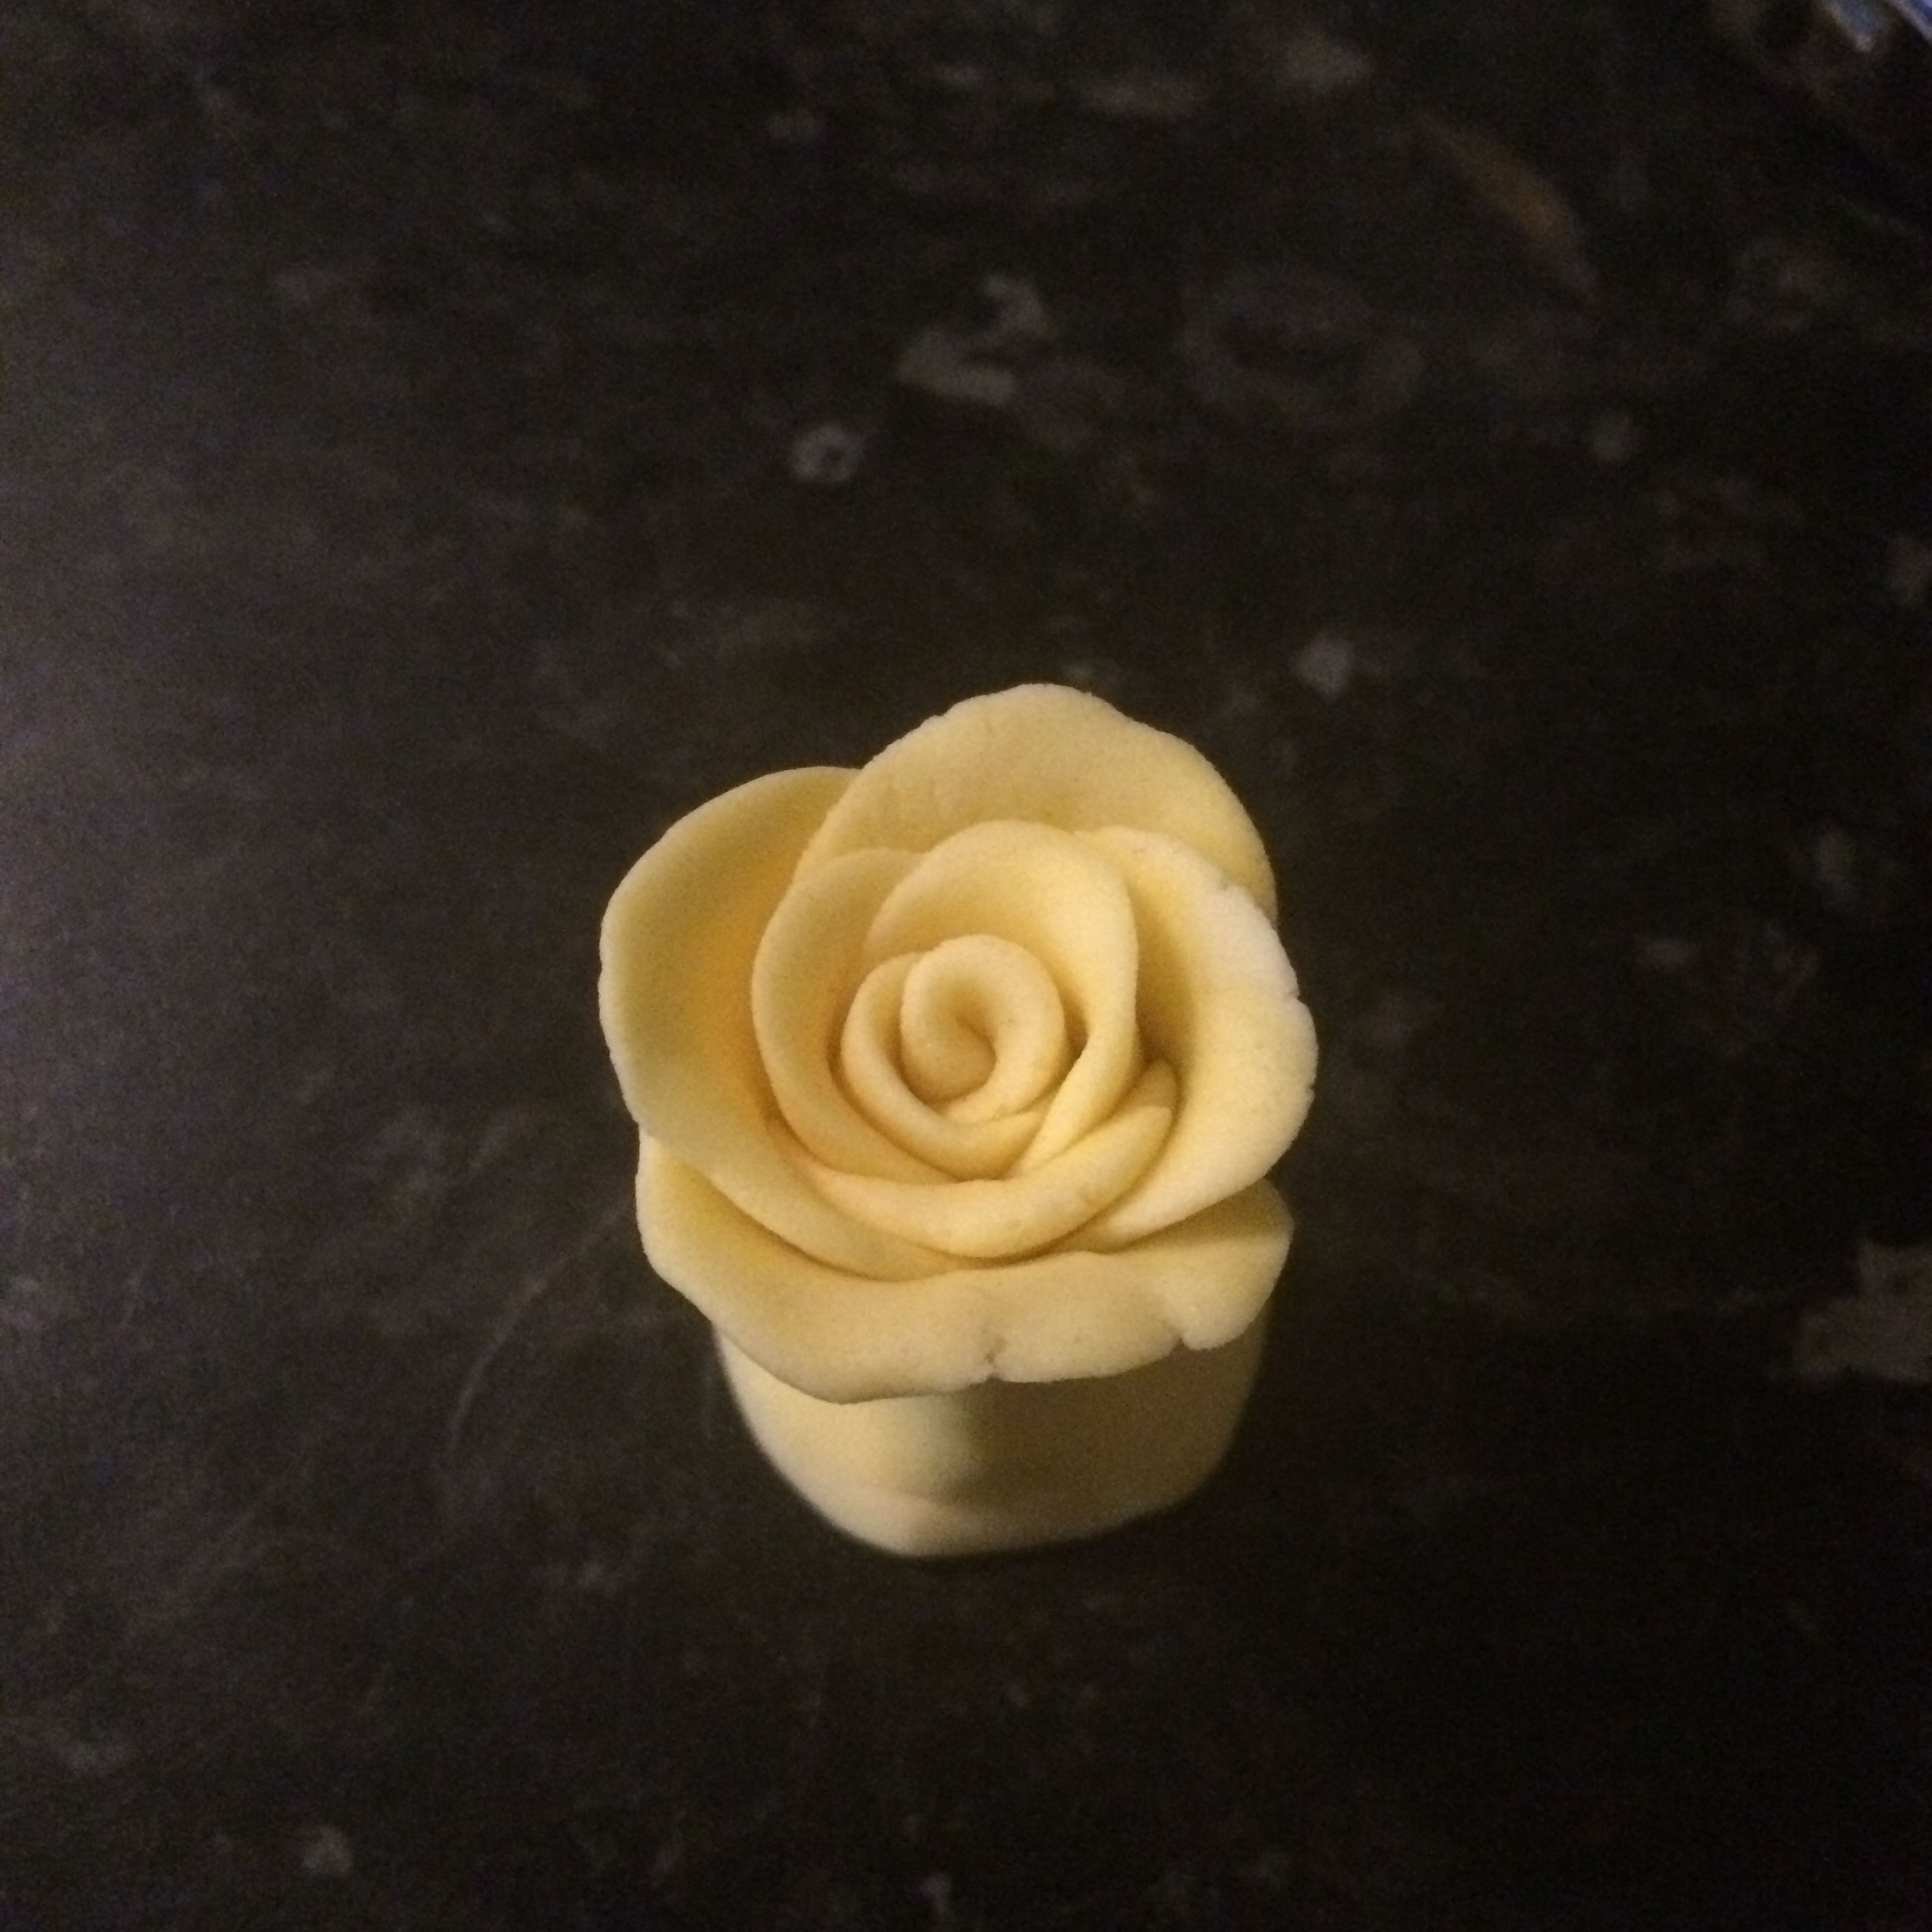 Gently mould the petals into presentation.